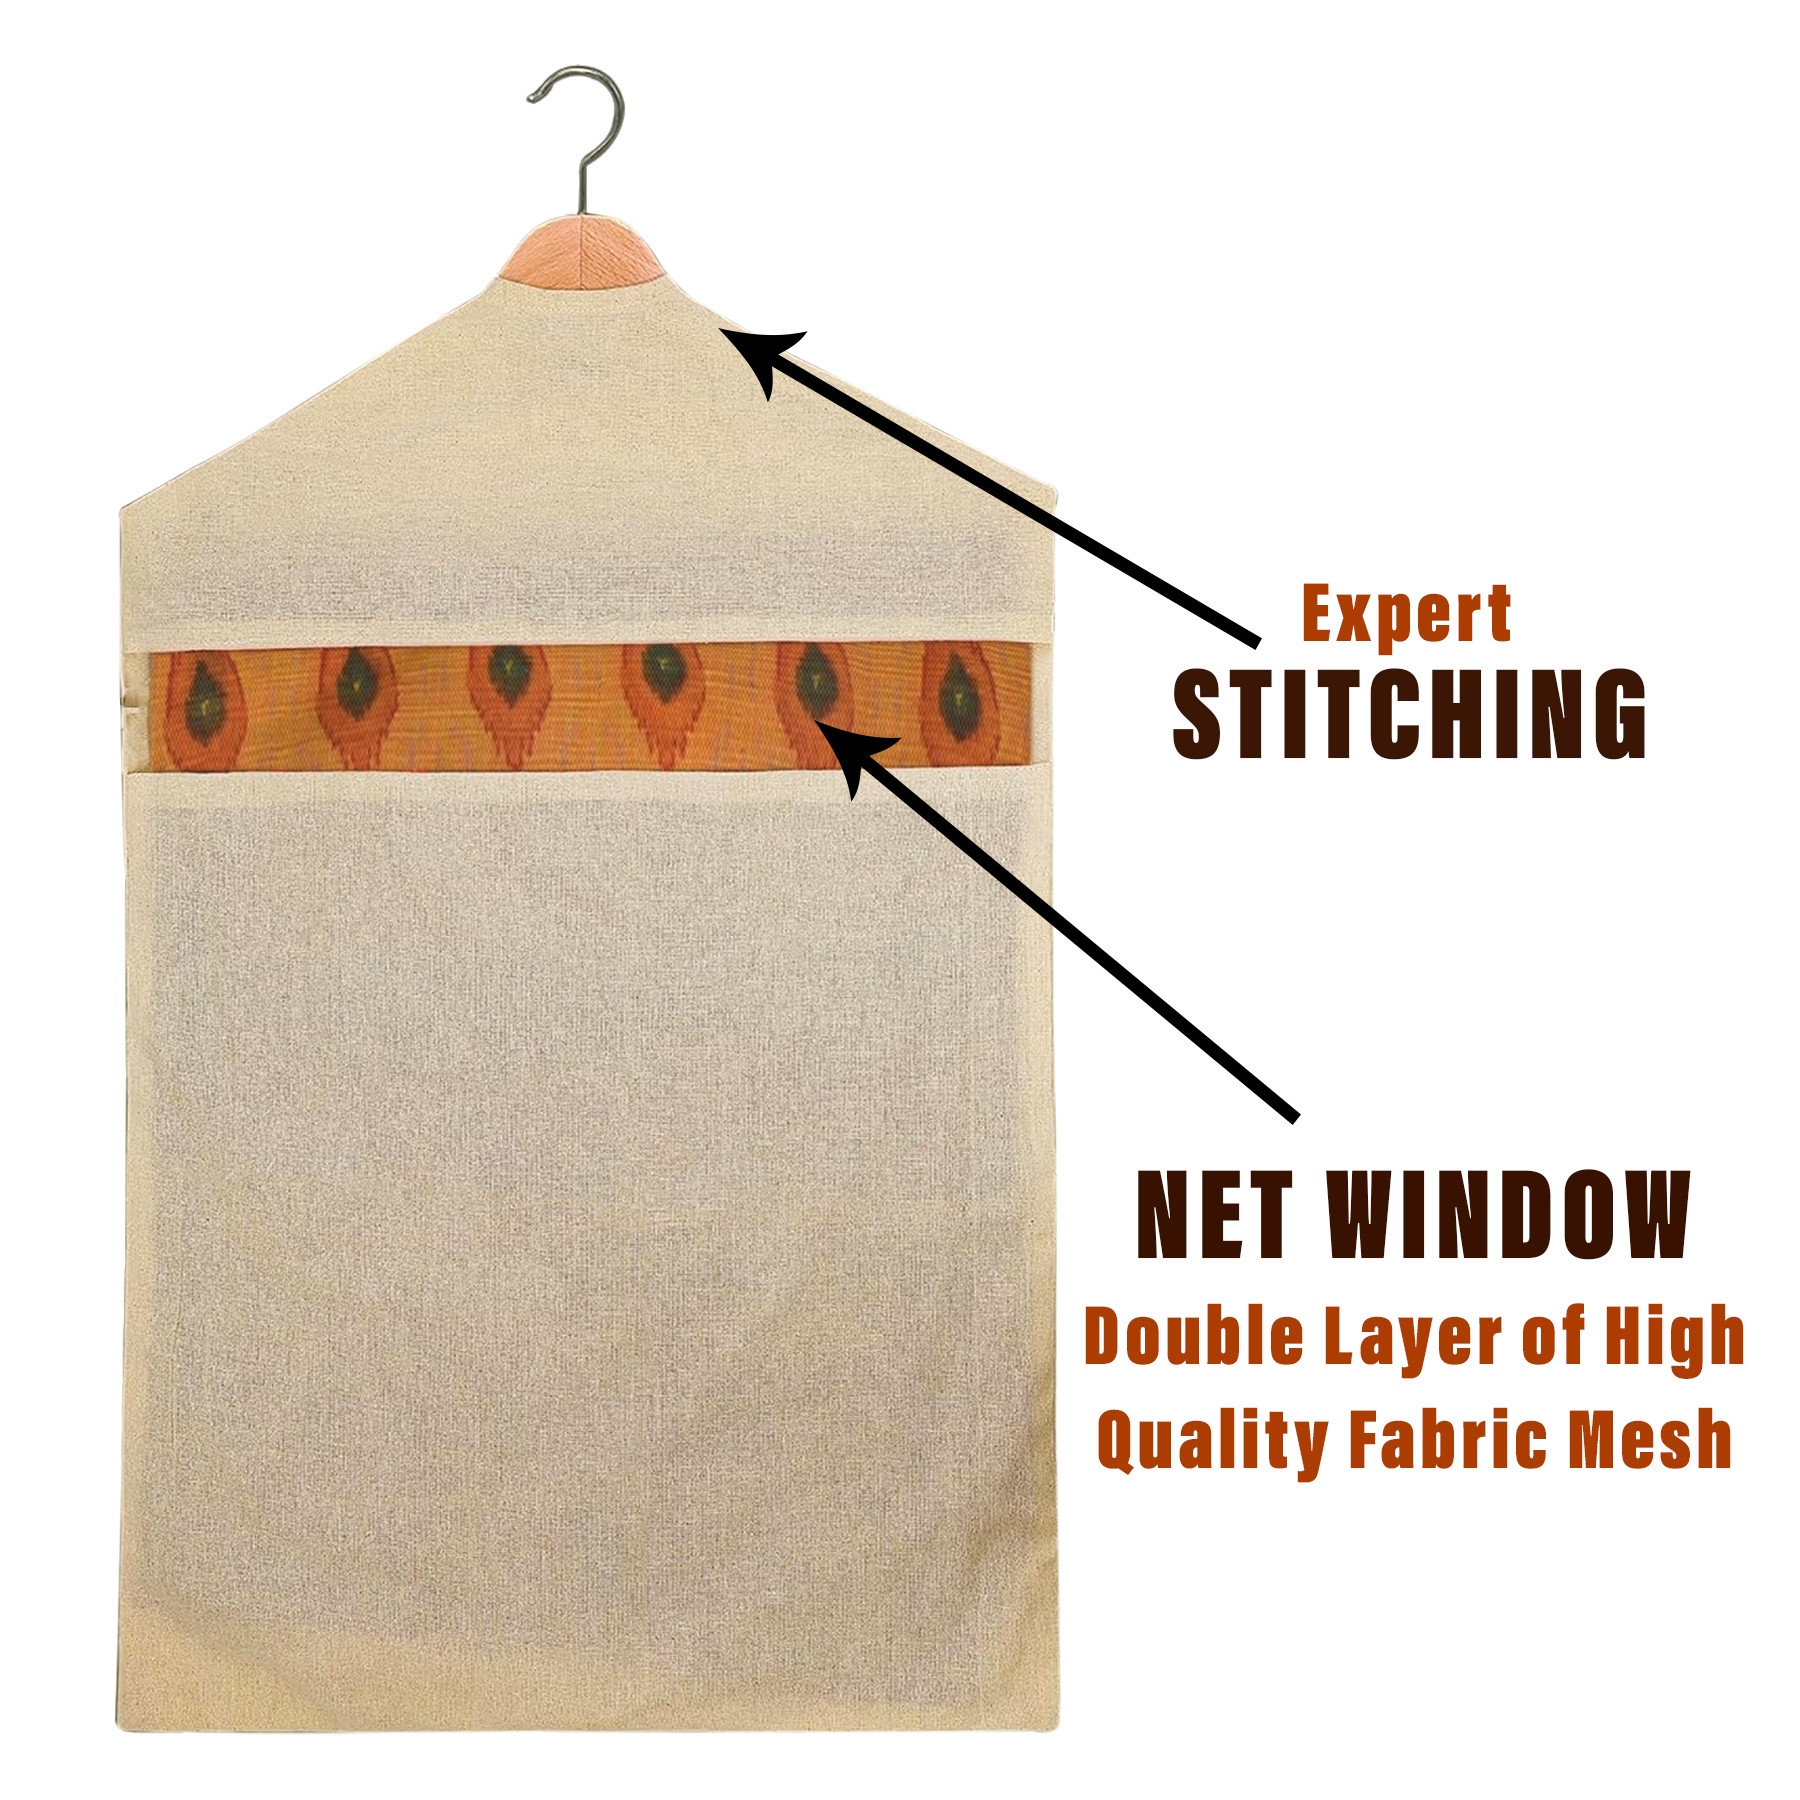 Kuber Industries Hanging Saree Bag | Cotton Clothes Bags for Storage | Hanging Cotton Saree Covers | Mesh Window Cloth Storage Bag | Saree Stoarge Covers with Zip |Cream